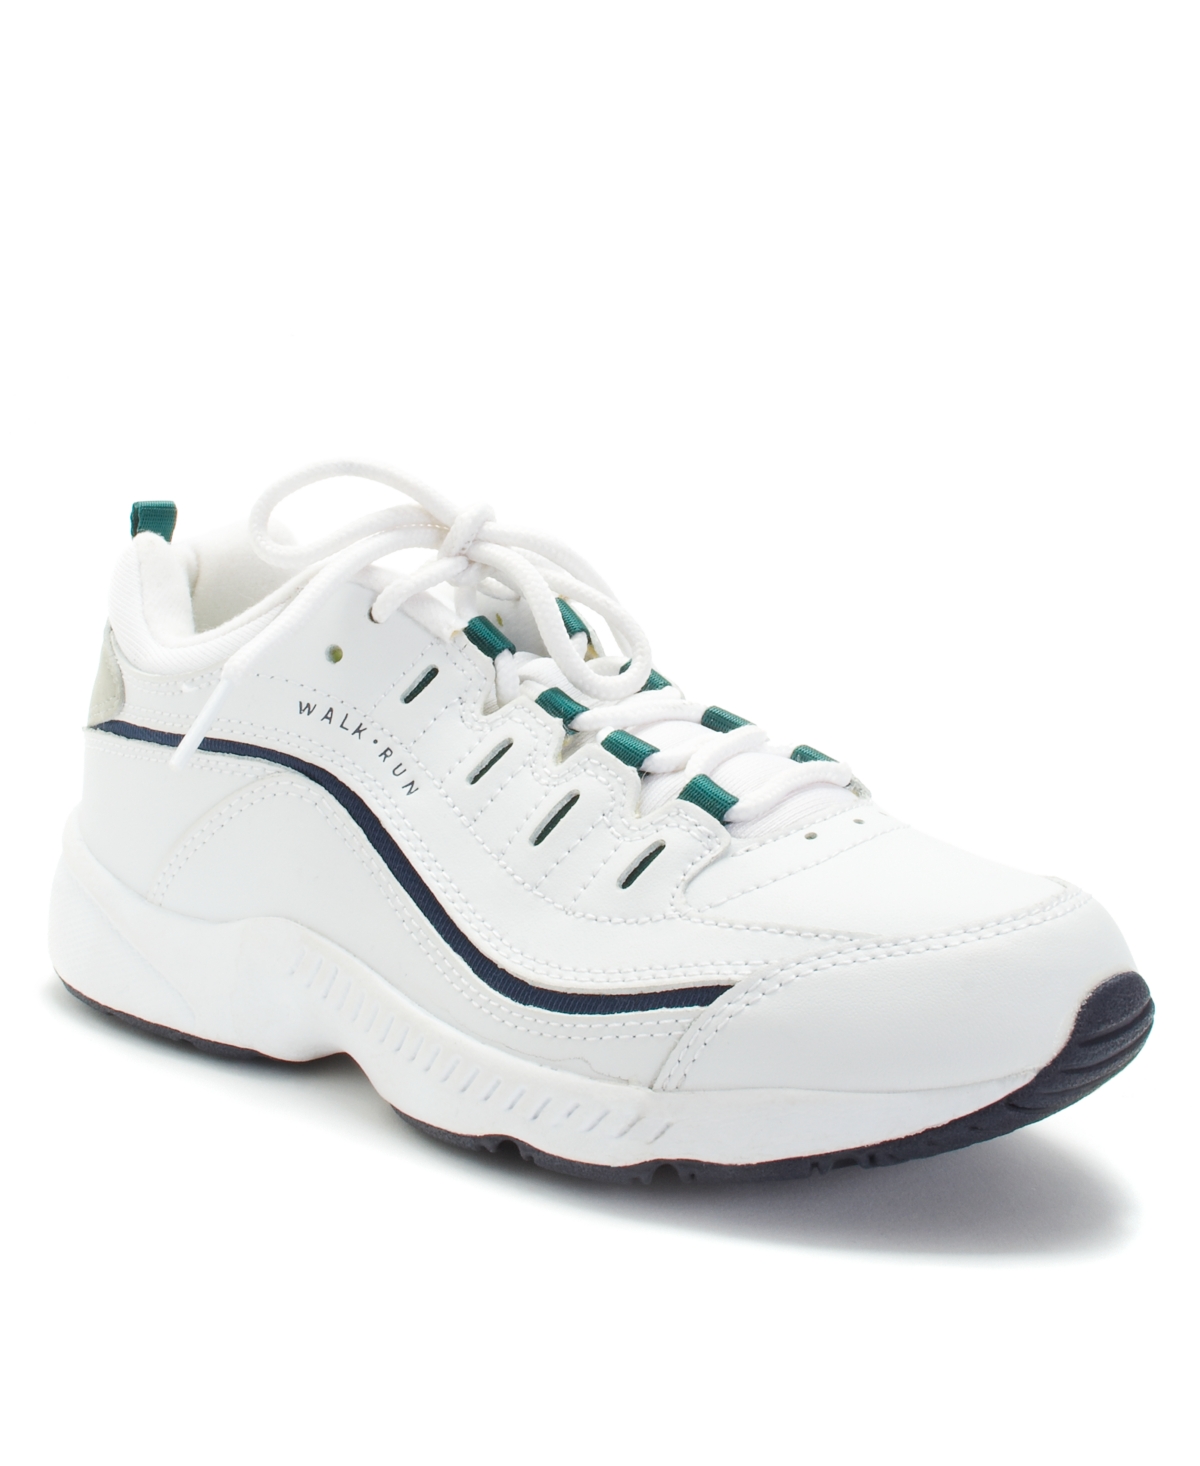 UPC 029005264354 product image for Easy Spirit Women's Romy Round Toe Casual Lace Up Walking Shoes Women's Shoes | upcitemdb.com